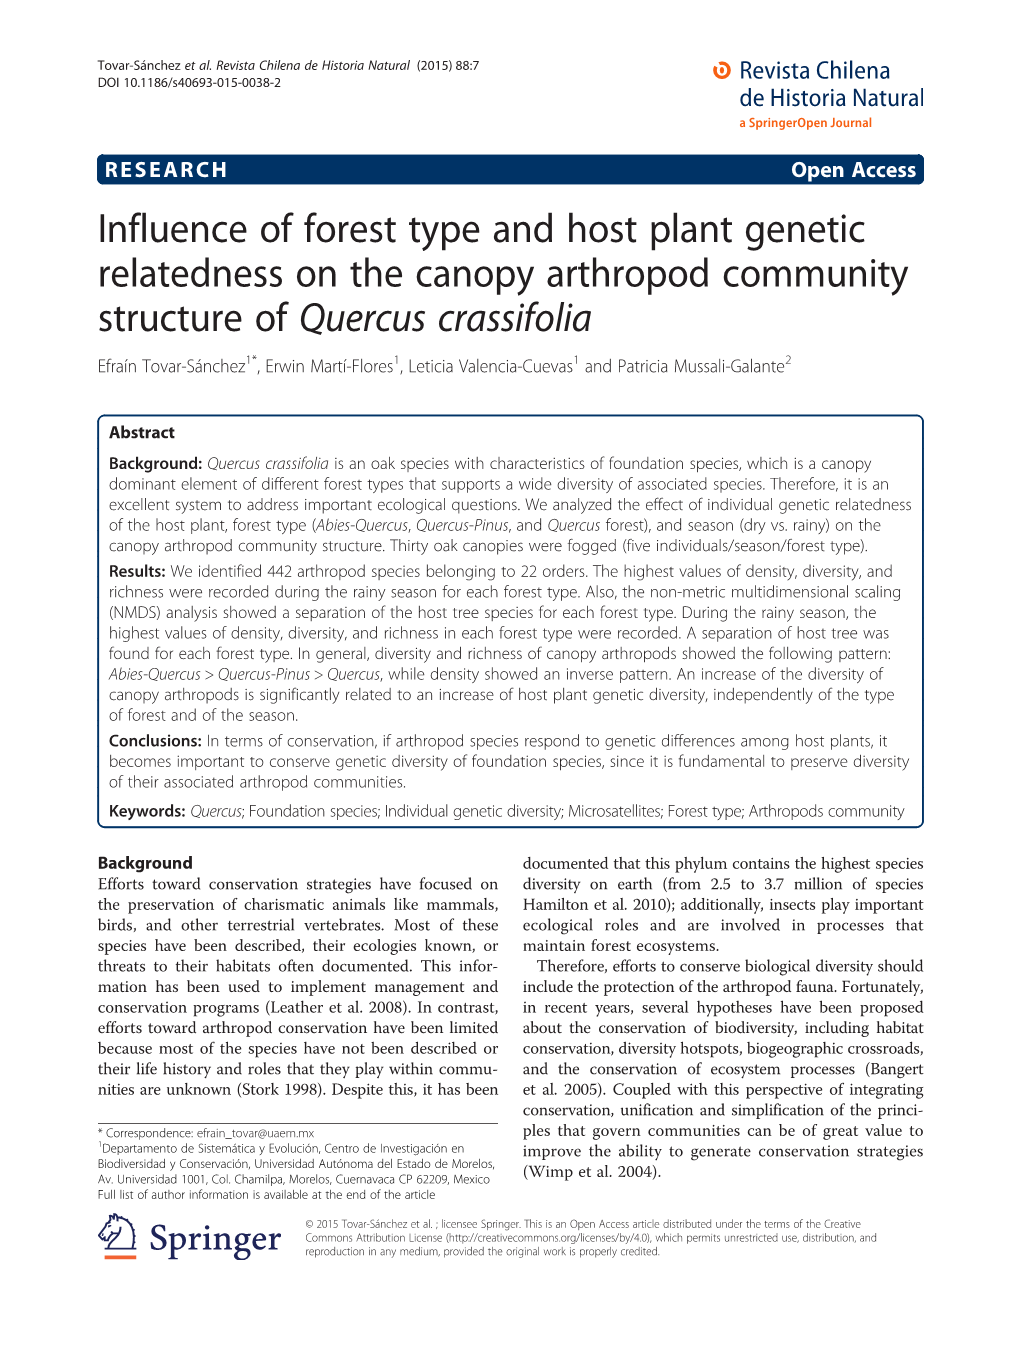 Influence of Forest Type and Host Plant Genetic Relatedness on the Canopy Arthropod Community Structure of Quercus Crassifolia